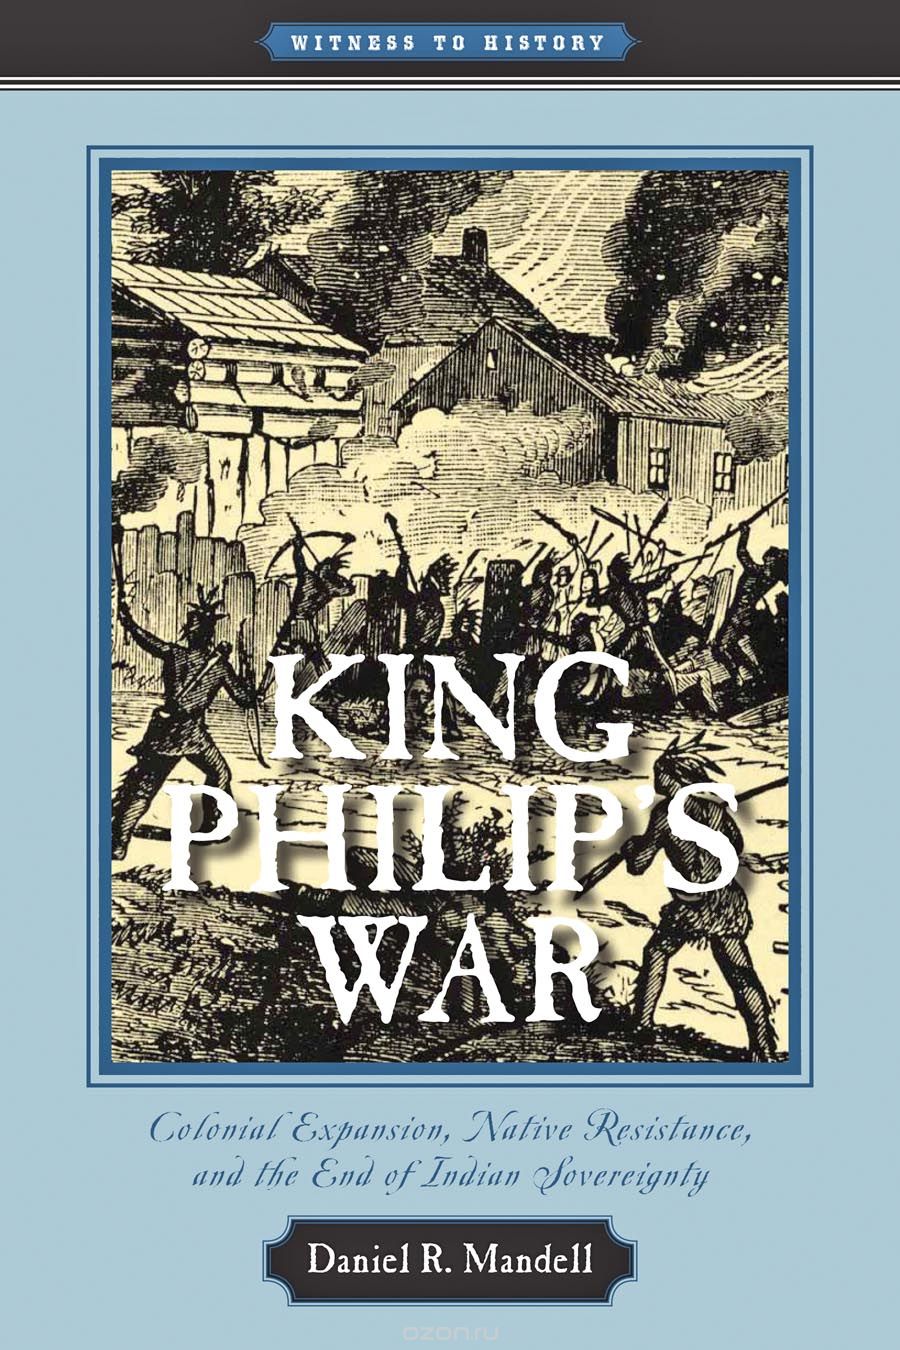 Скачать книгу "King Philip?s War – Colonial Expansion, Native Resistance and the End of Indian Sovereignty"